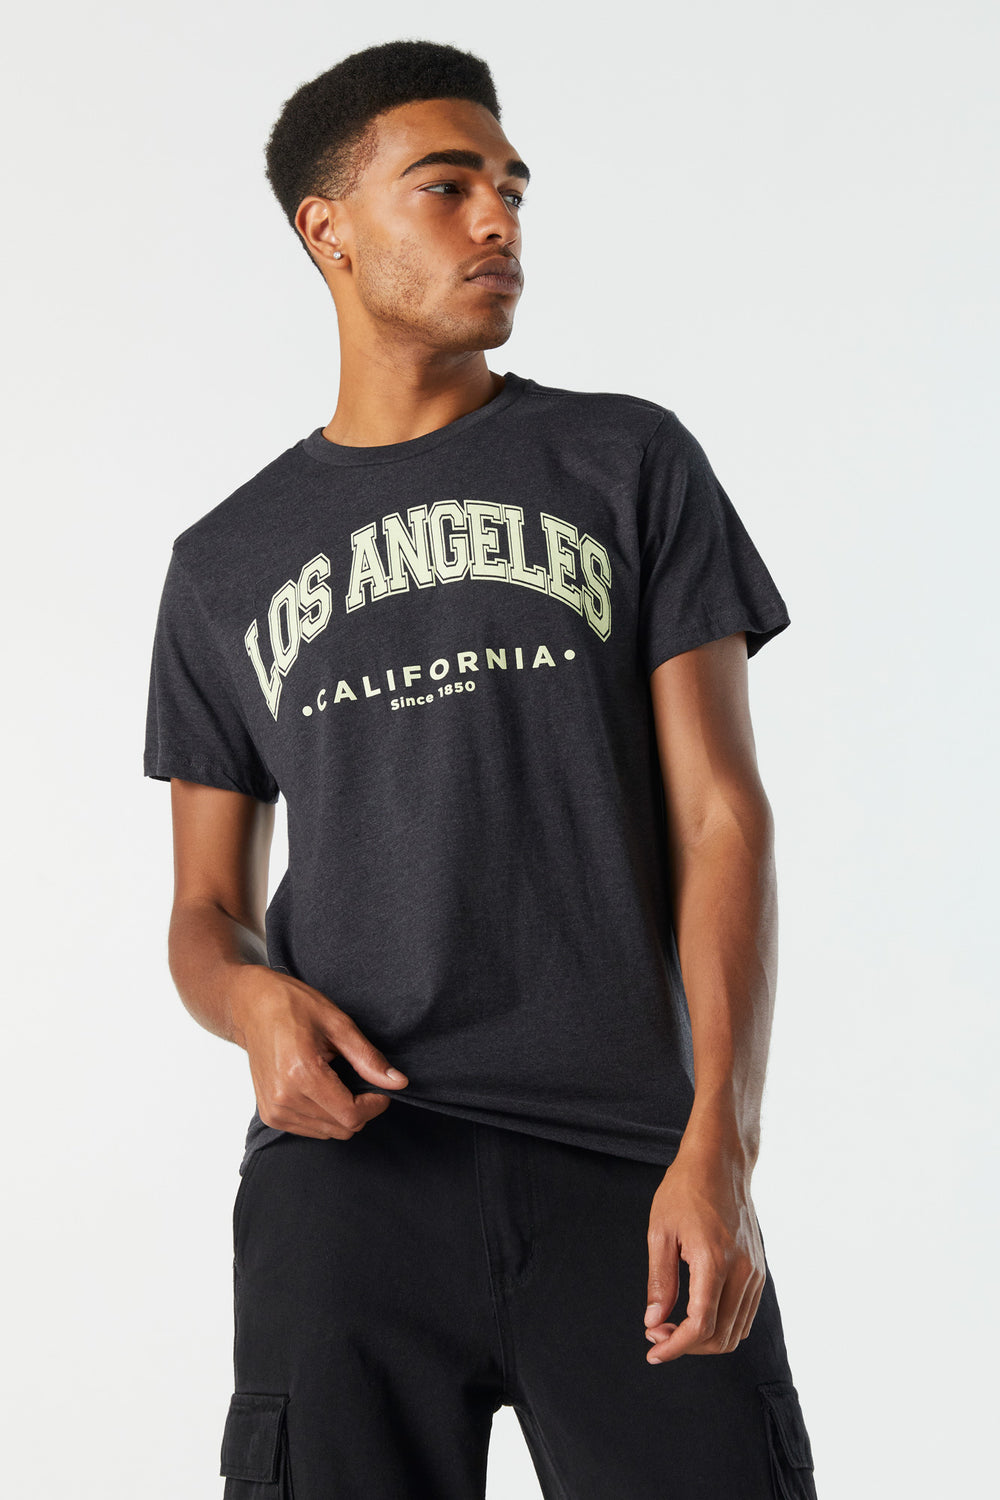 Los Angeles Graphic T-Shirt Los Angeles Graphic T-Shirt 1